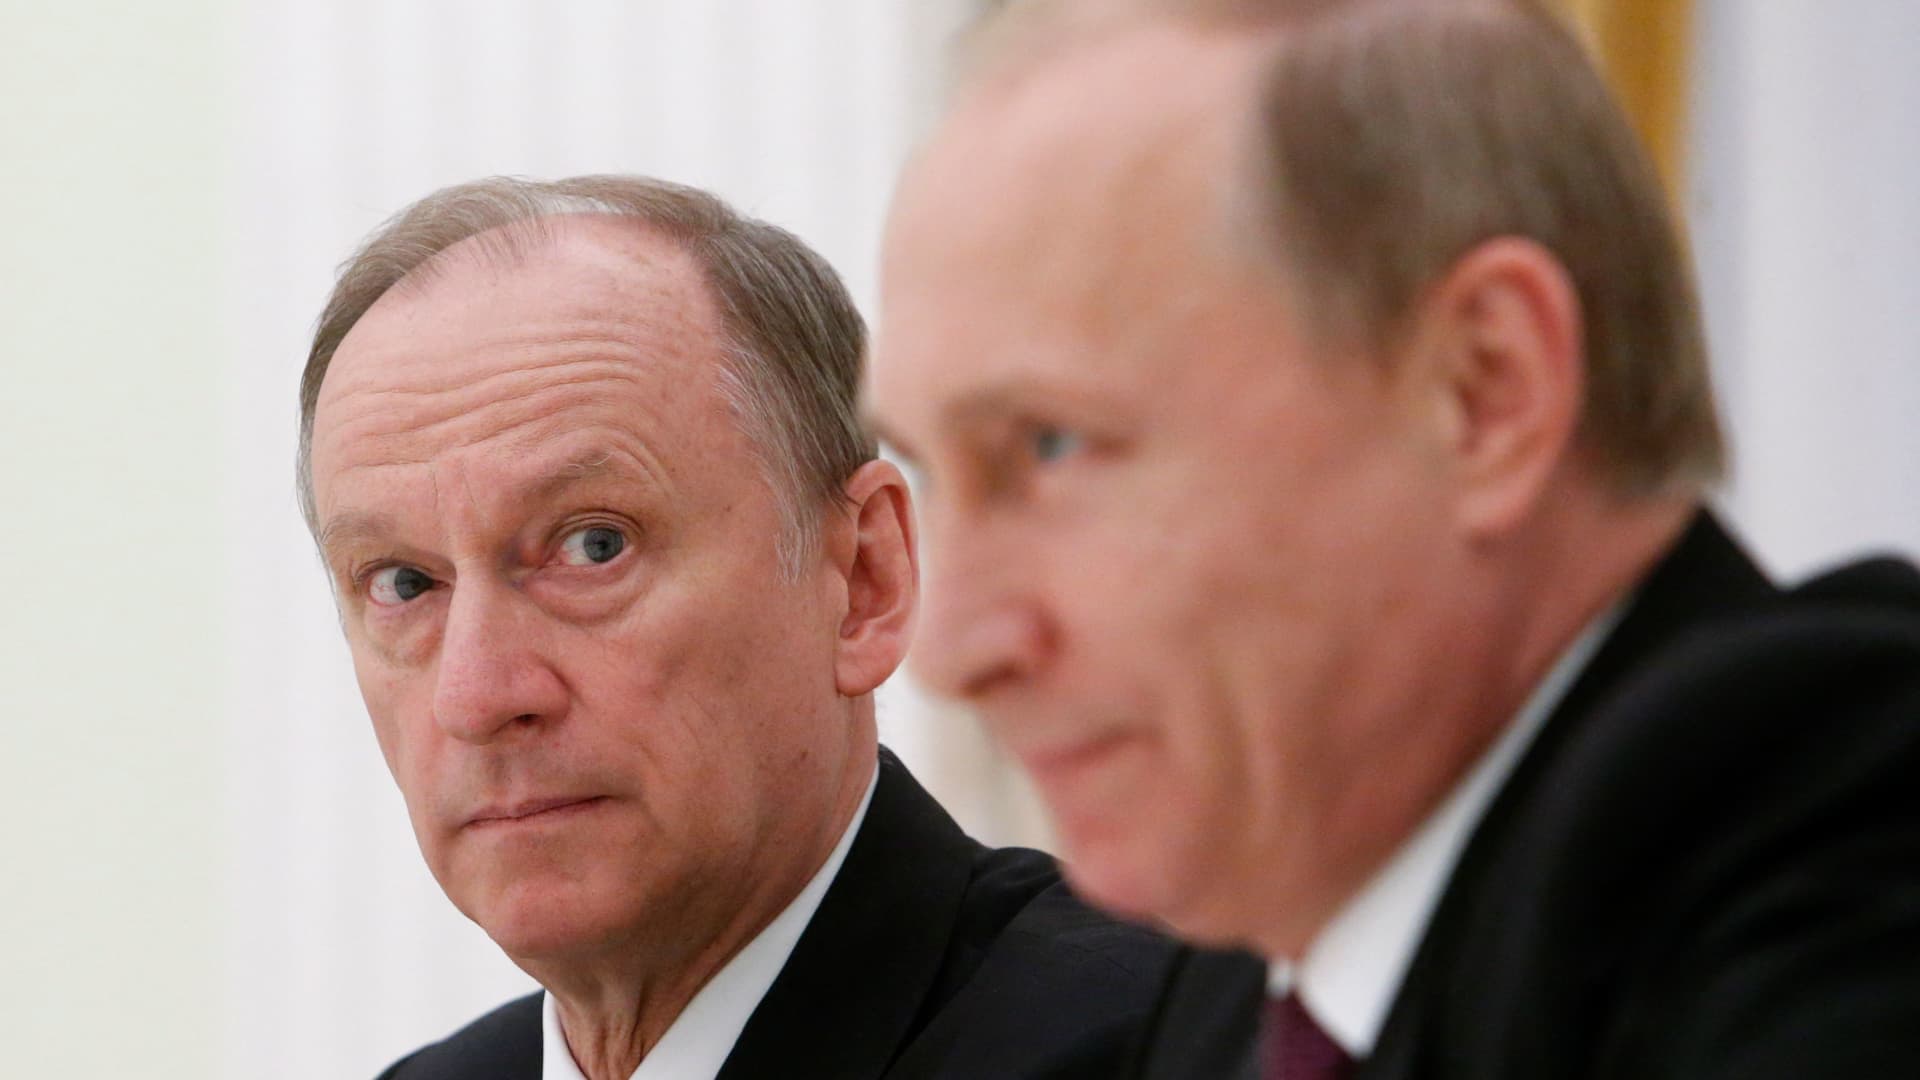 Russian Security Council Secretary Nikolai Patrushev and President Vladimir Putin during a meeting with the BRICS countries' senior officials in charge of security matters at the Kremlin in Moscow on May 26, 2015.